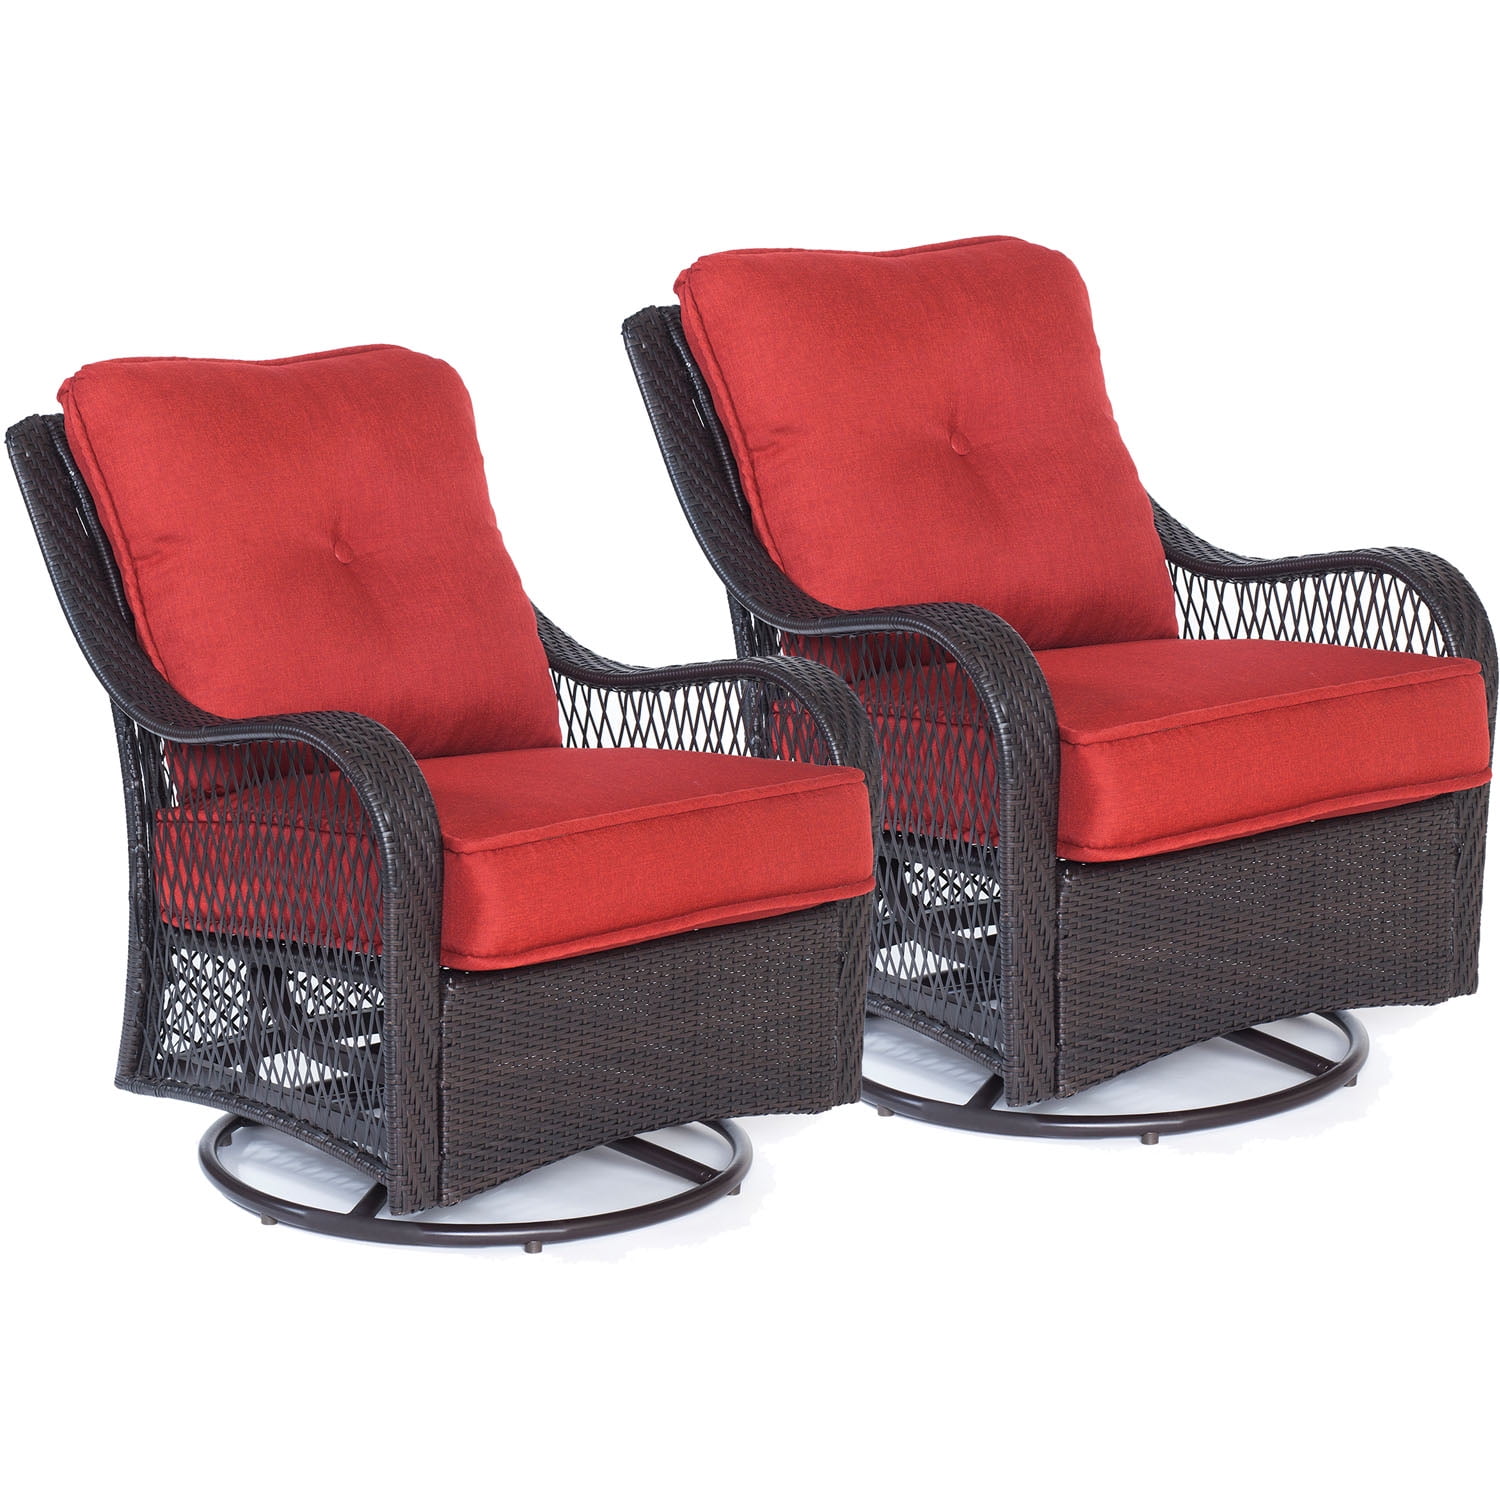 Hanover Orleans Outdoor Swivel Rocking Lounge Chairs - Walmart.com